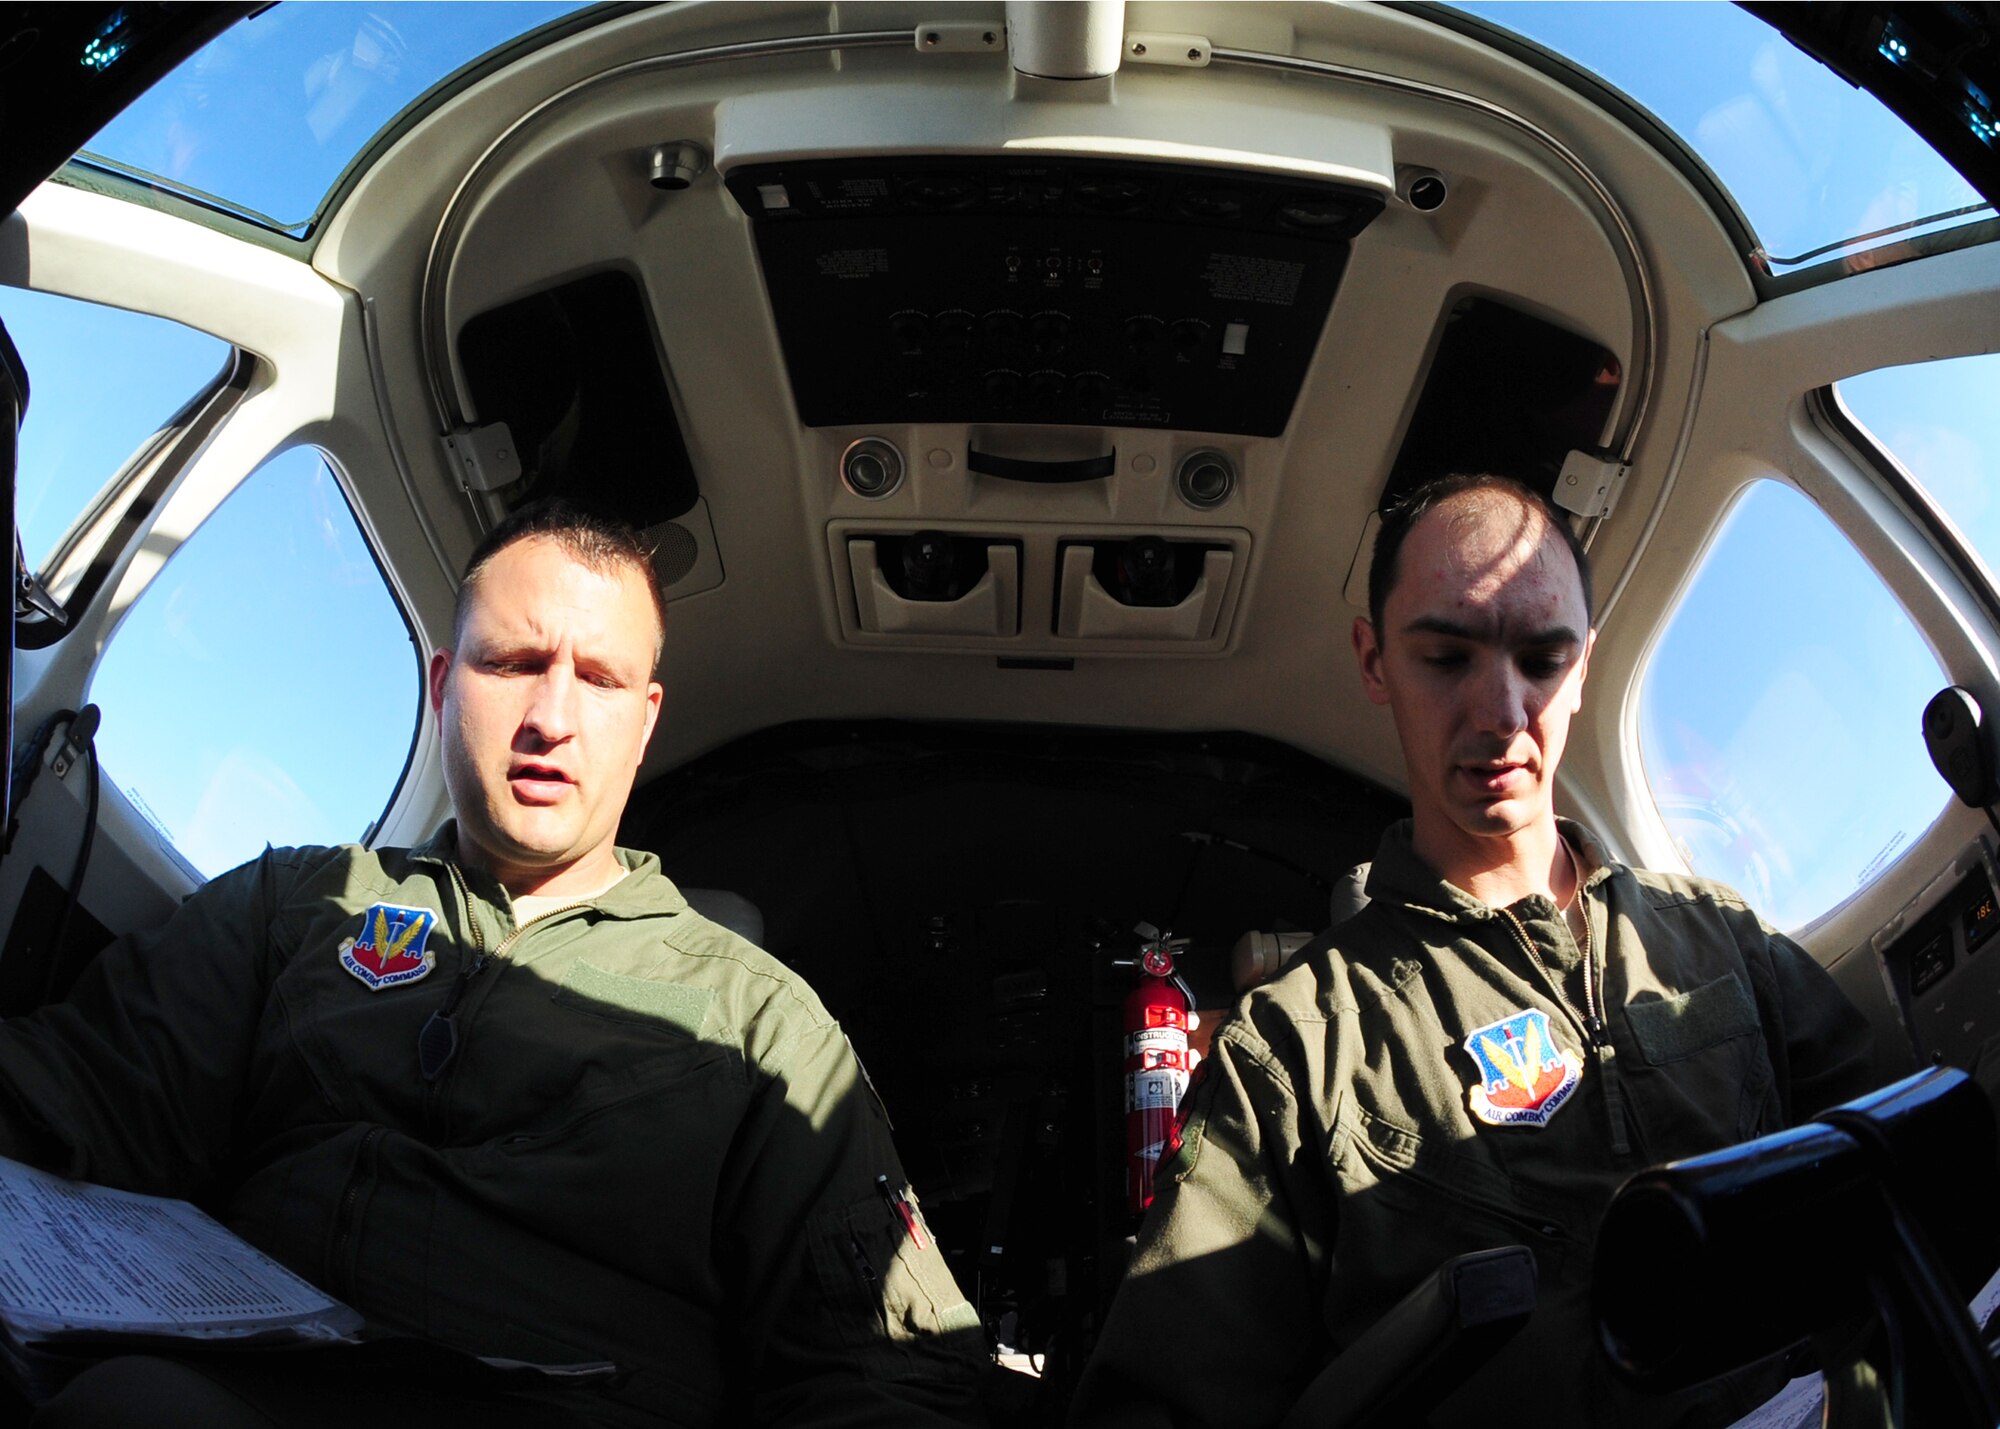 Two pilots complete a pre-flight checklist before their first flight ever in an Air Force MC-12W Liberty intelligence, surveillance, and reconnaissance aircraft at Beale Air Force Base Oct. 9, 2012. After training with the 489th Reconnaissance Squadron, the pilots will become part of the operations unit associated with the MC-12W, the 427th RS. (U.S. Air Force photo by Senior Airman Shawn Nickel/Released)